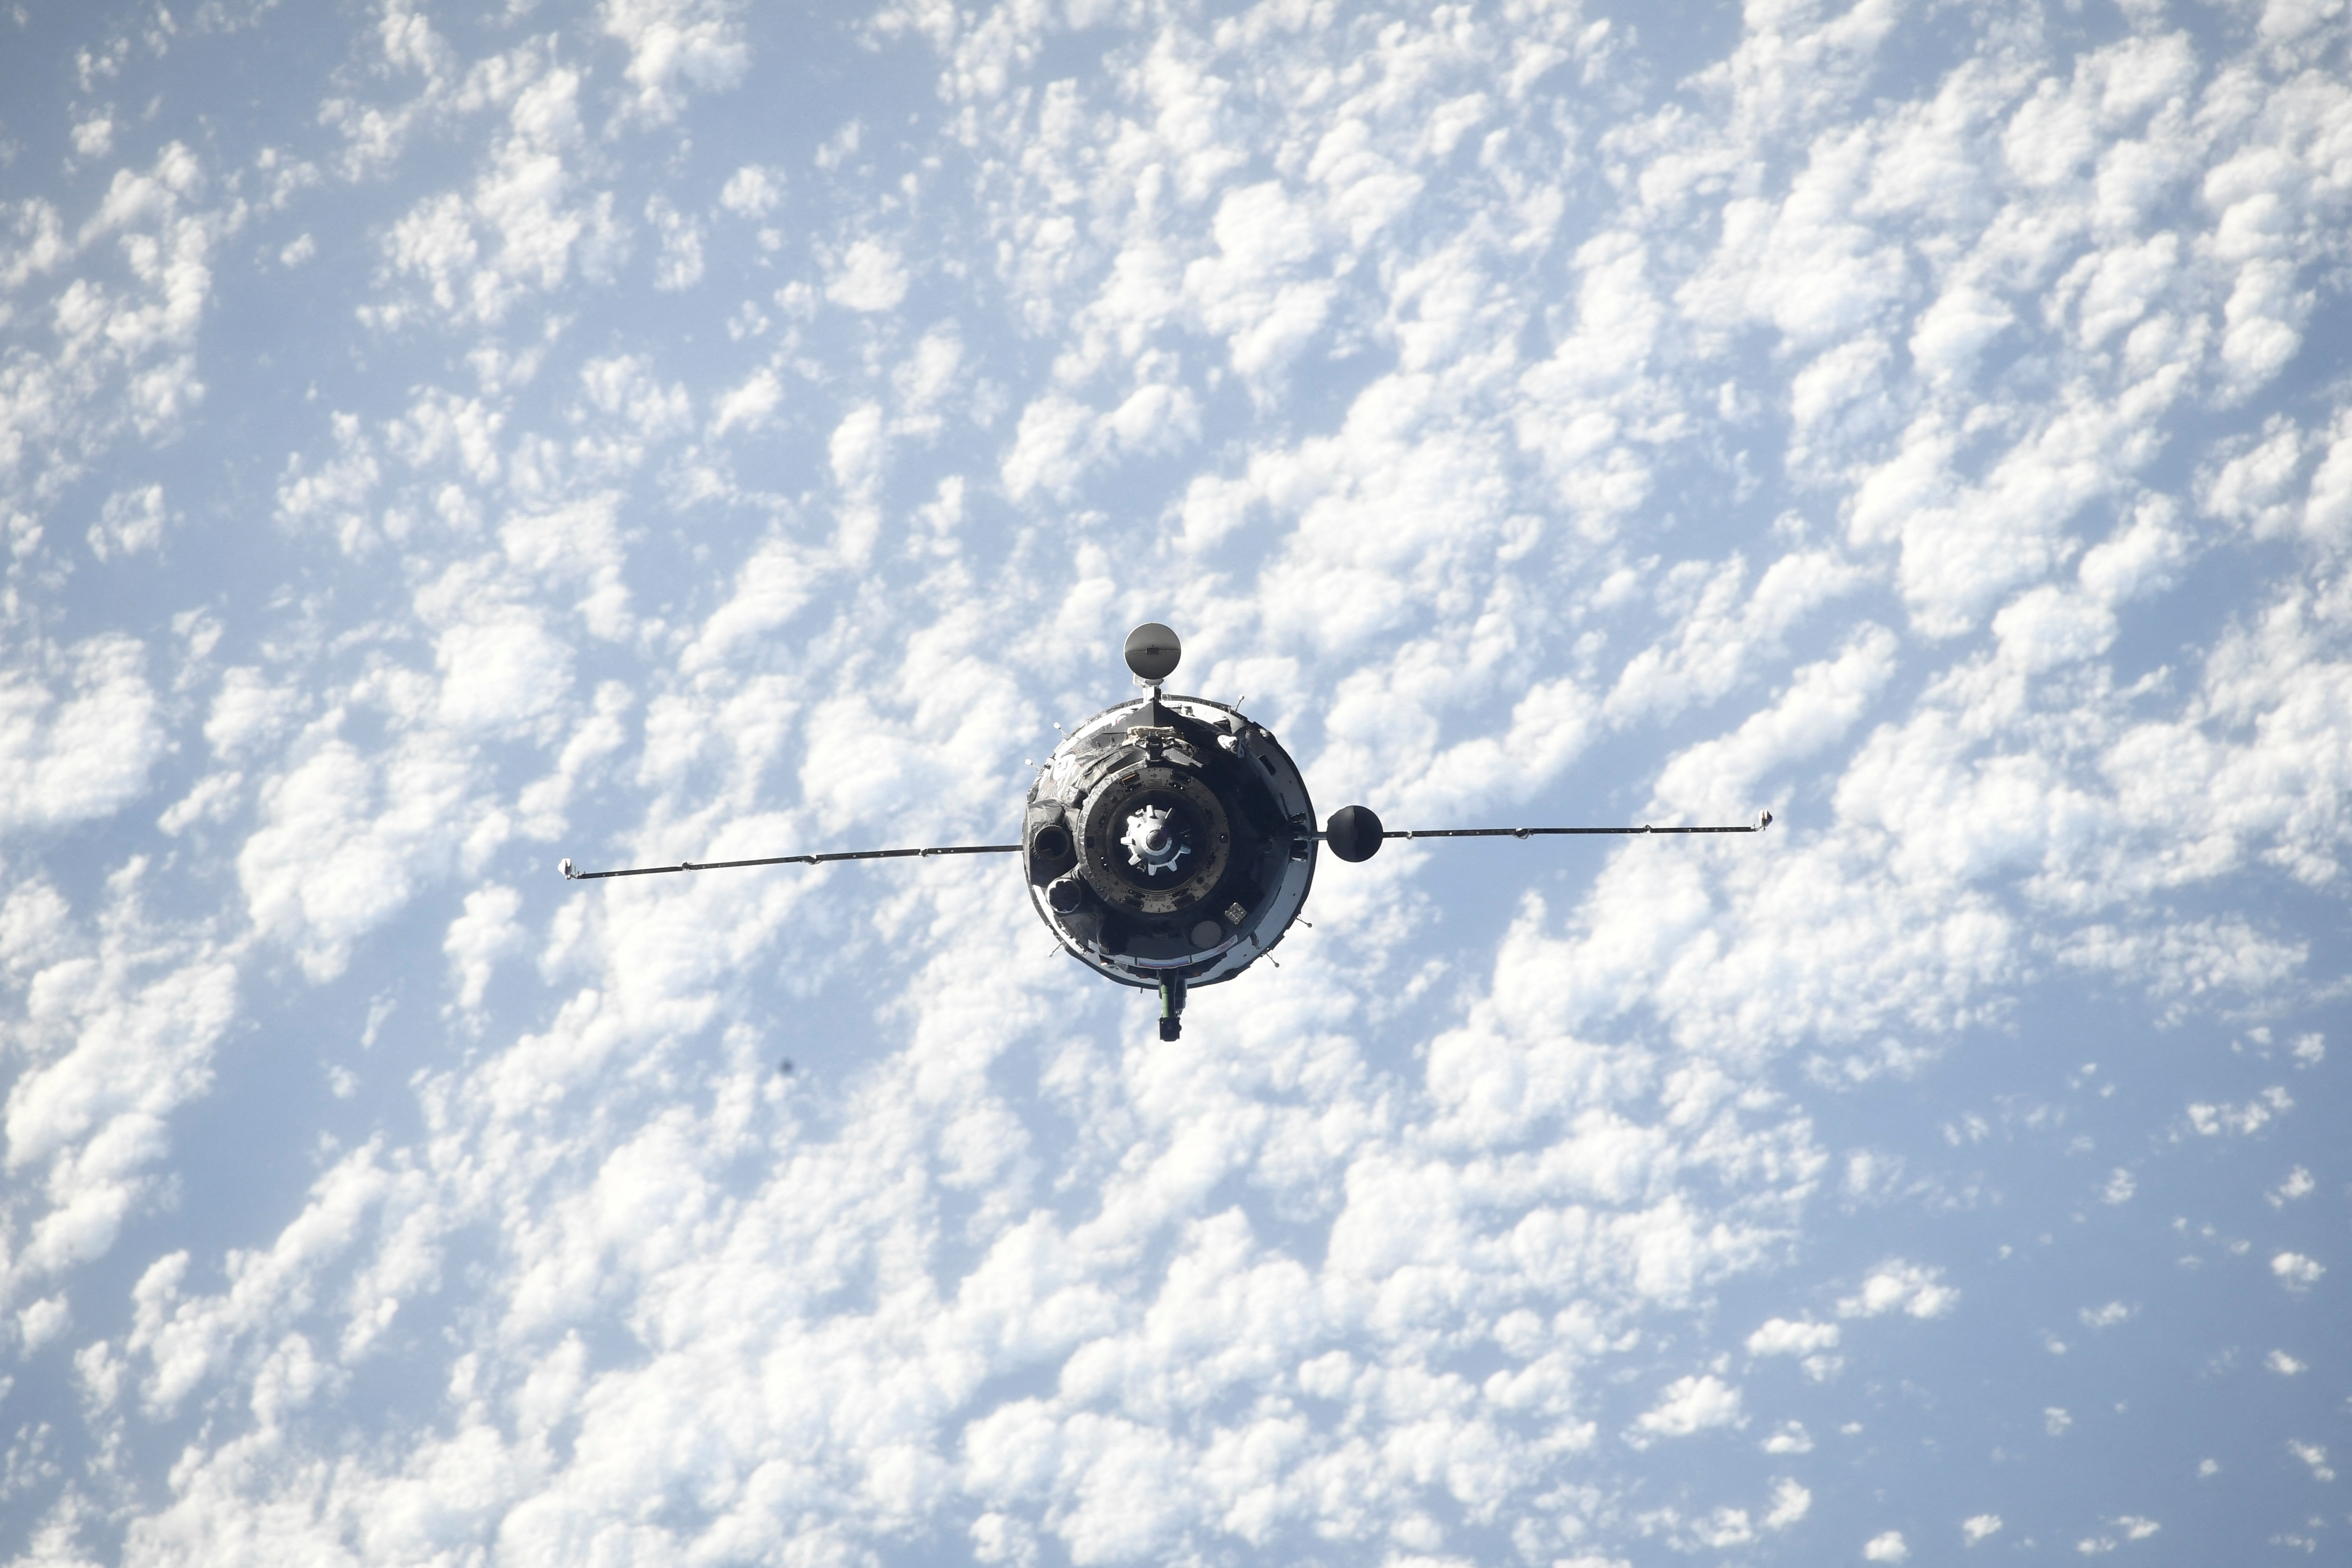 The Soyuz MS-21 spacecraft carrying Russian cosmonauts is seen during its docking to the International Space Station (ISS)